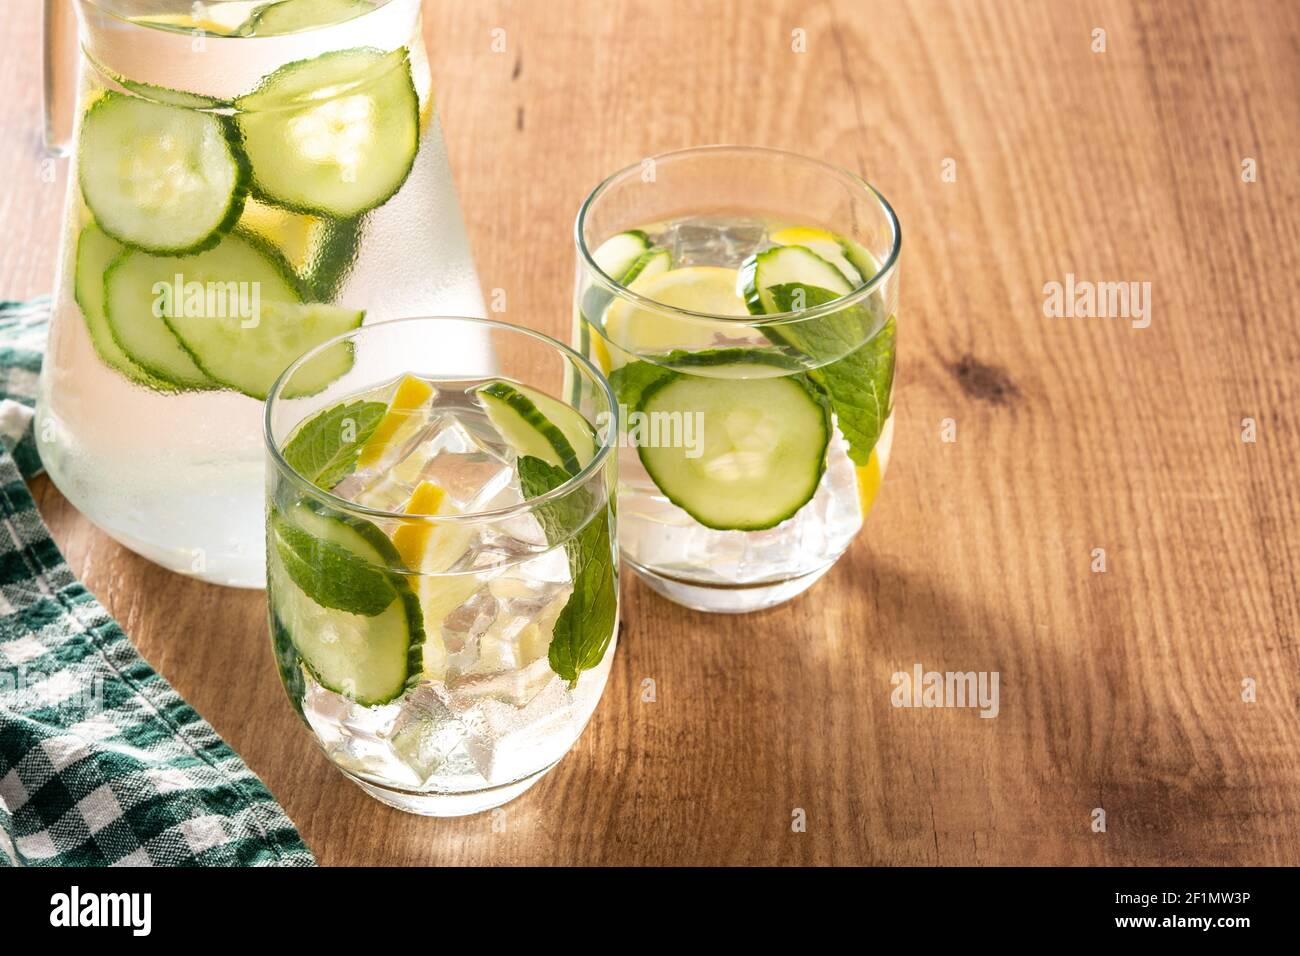 Sassy water or water with cucumber and lemon on wooden table Stock Photo